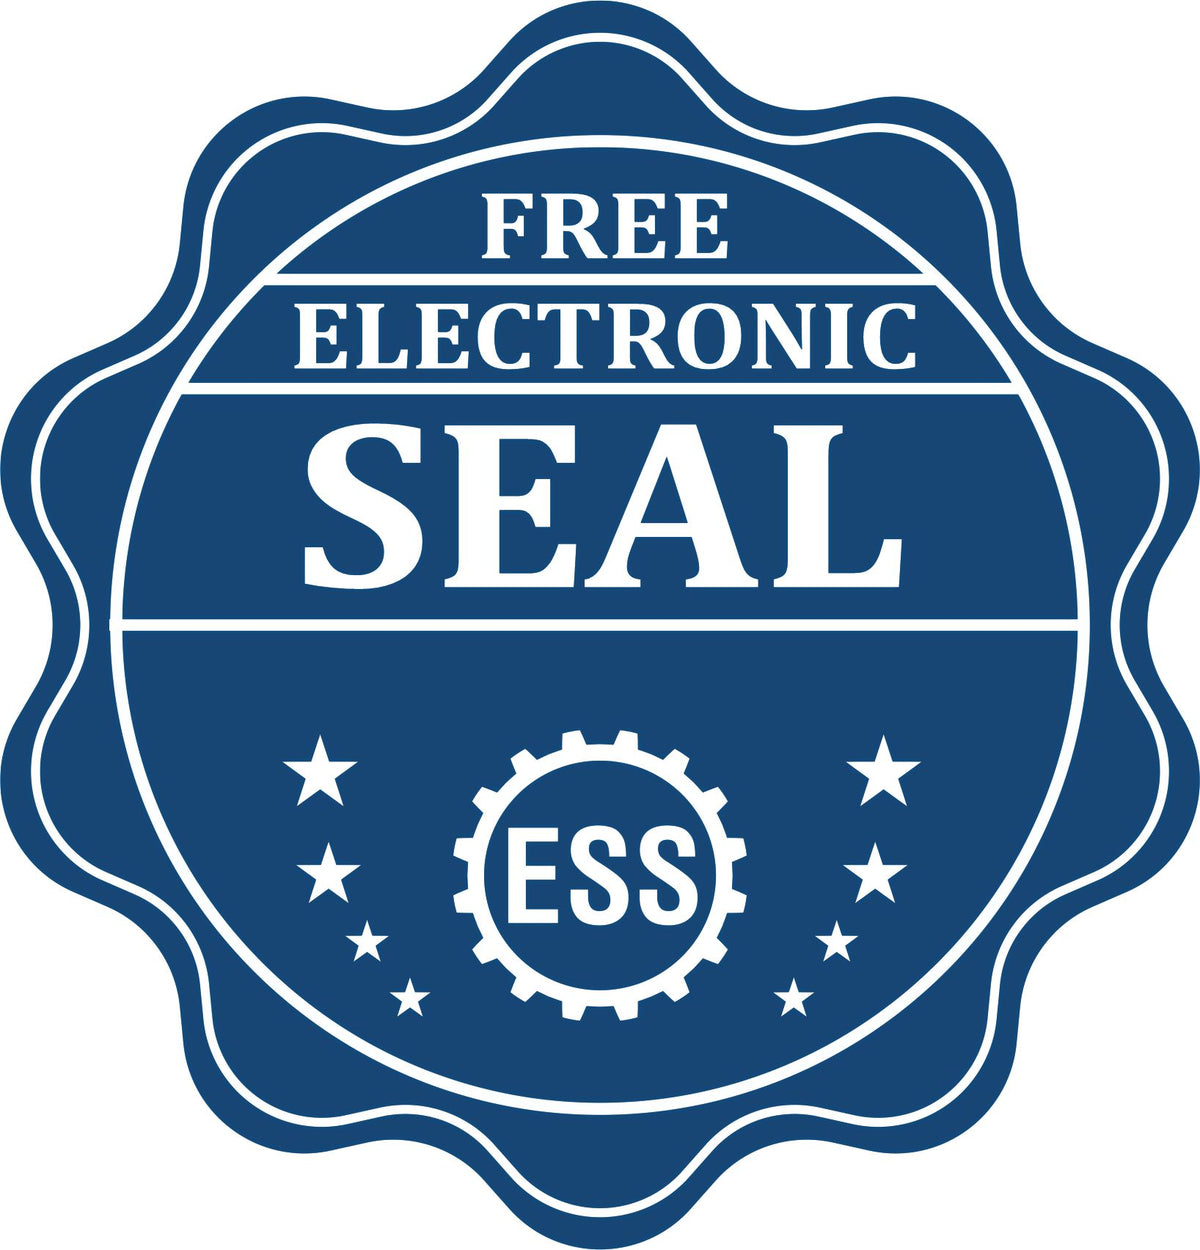 A badge showing a free electronic seal for the Premium MaxLight Pre-Inked Pennsylvania Landscape Architectural Stamp with stars and the ESS gear on the emblem.